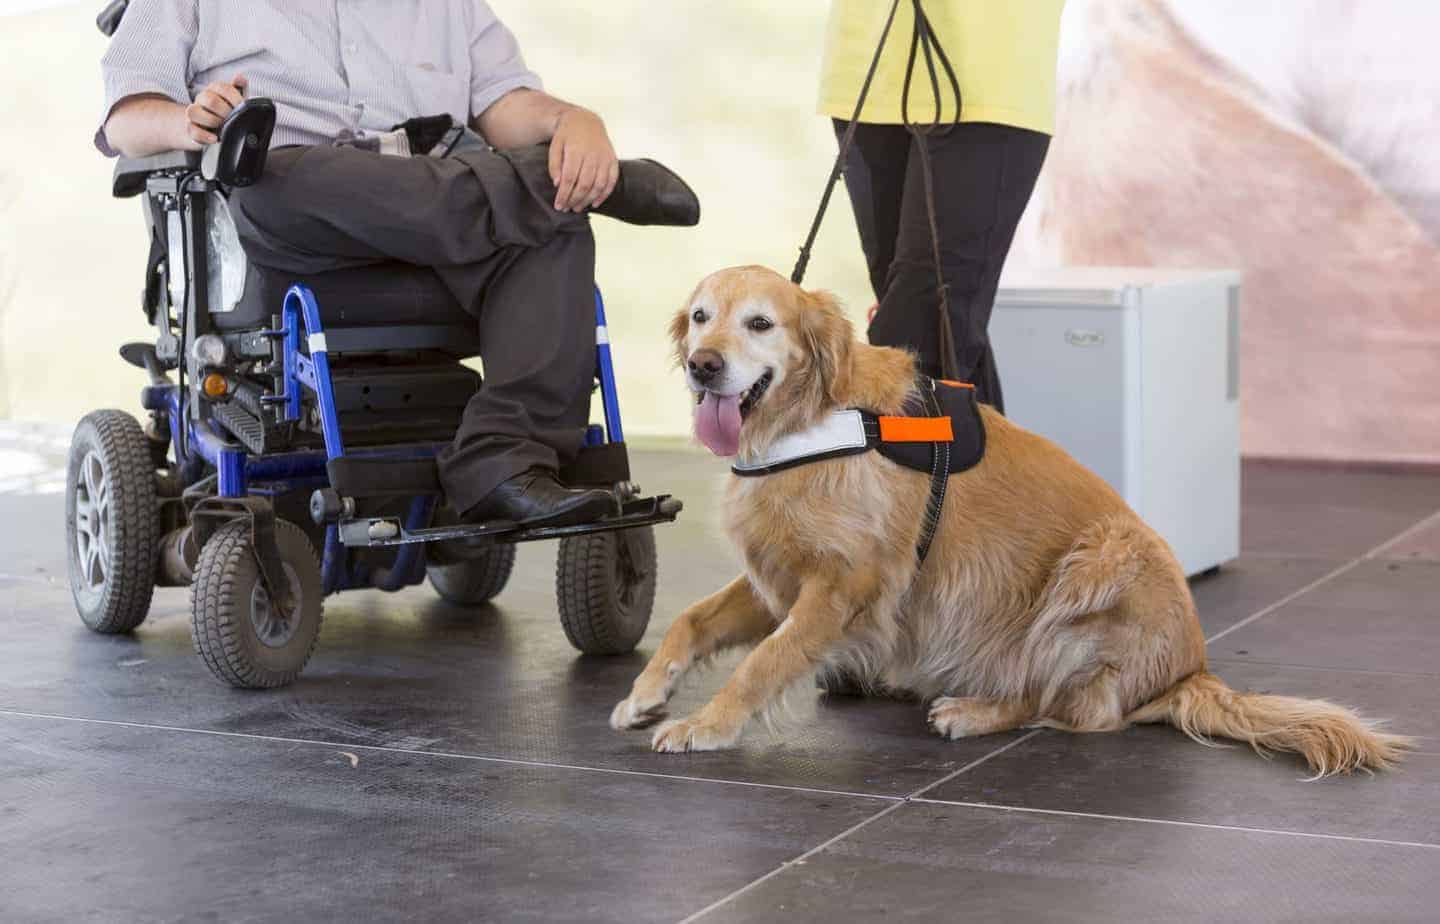 where can i work if i have a service dog